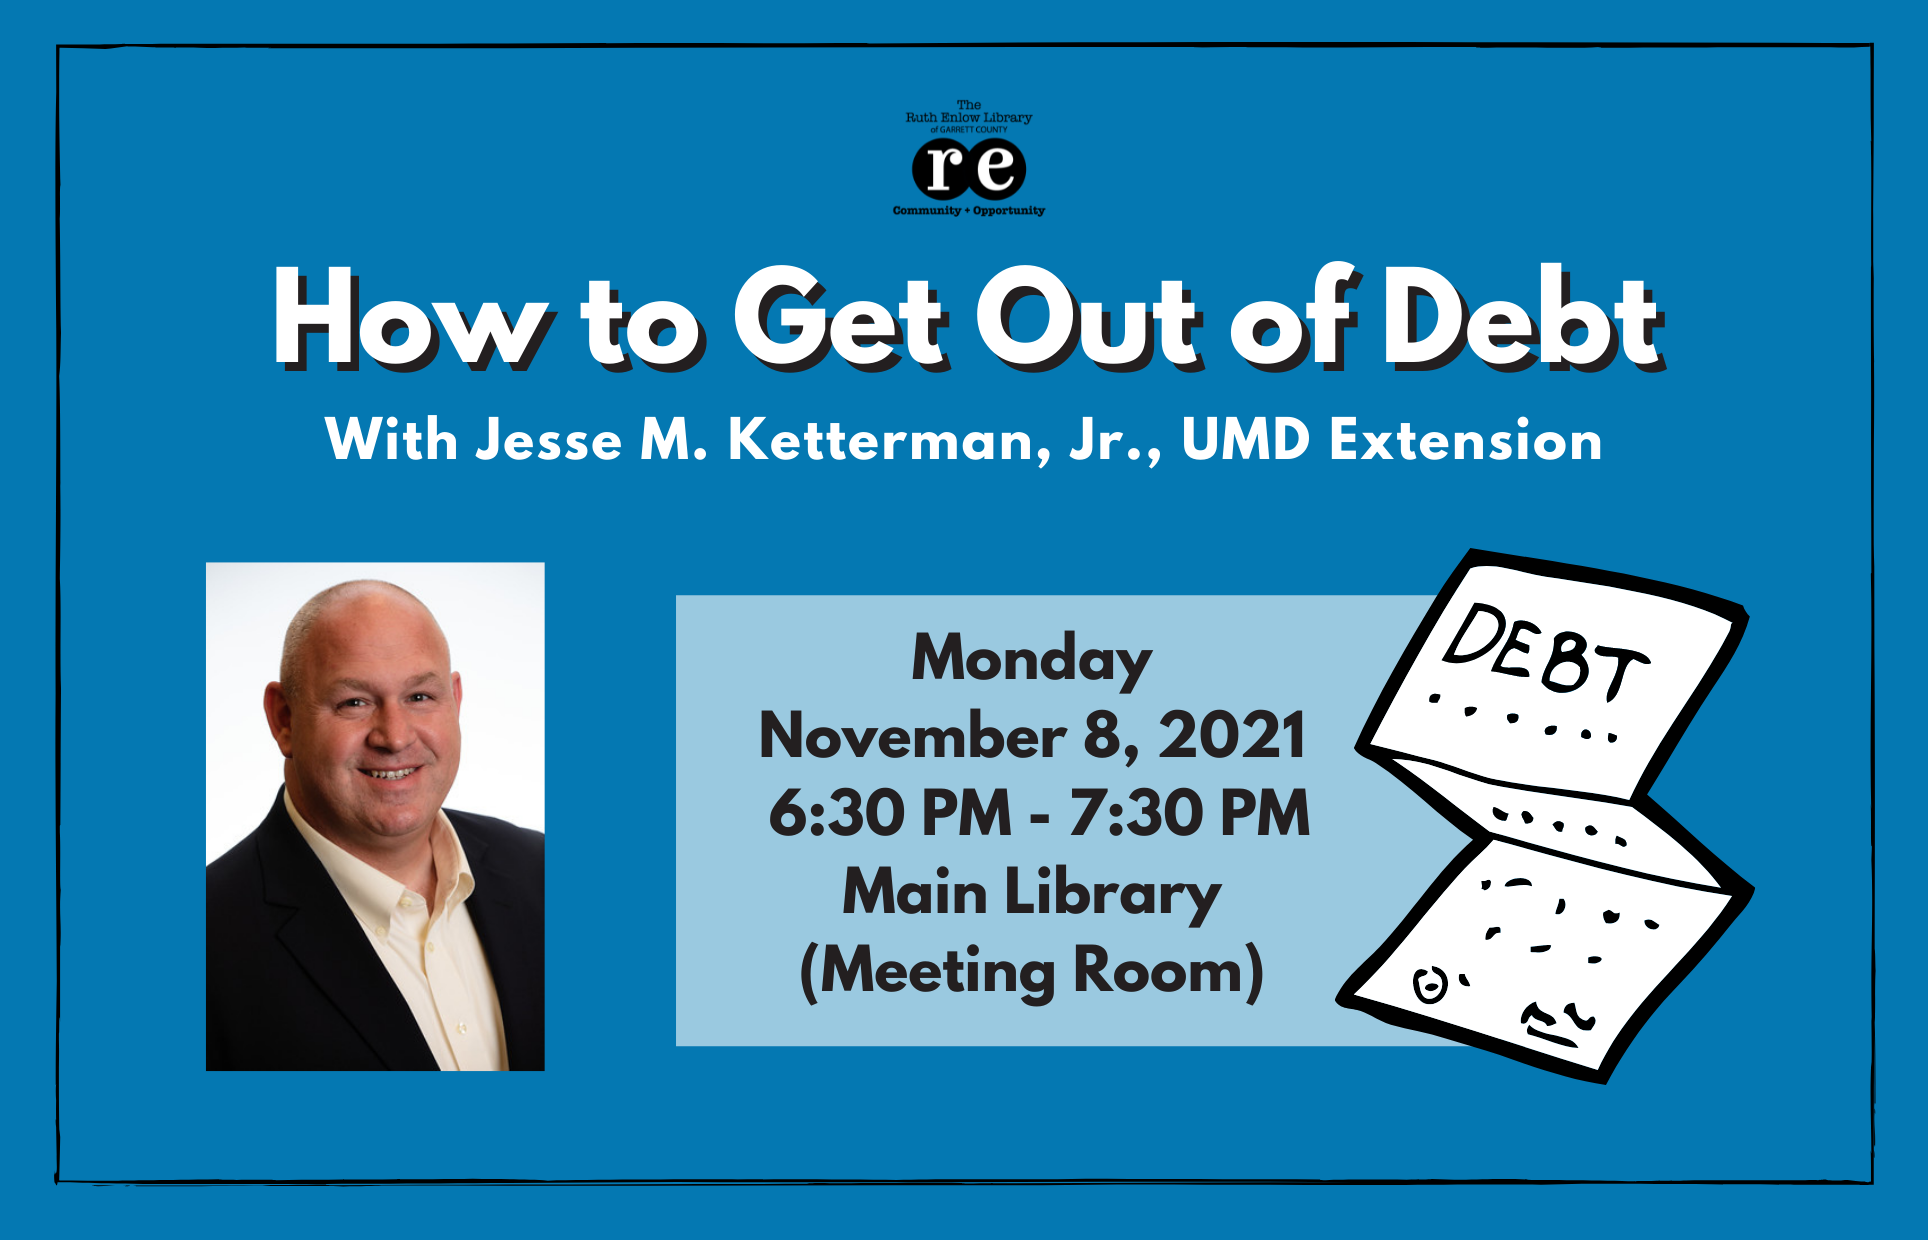 How to Get Out of Debt (with Jesse M. Ketterman, Jr., UMD Extension)